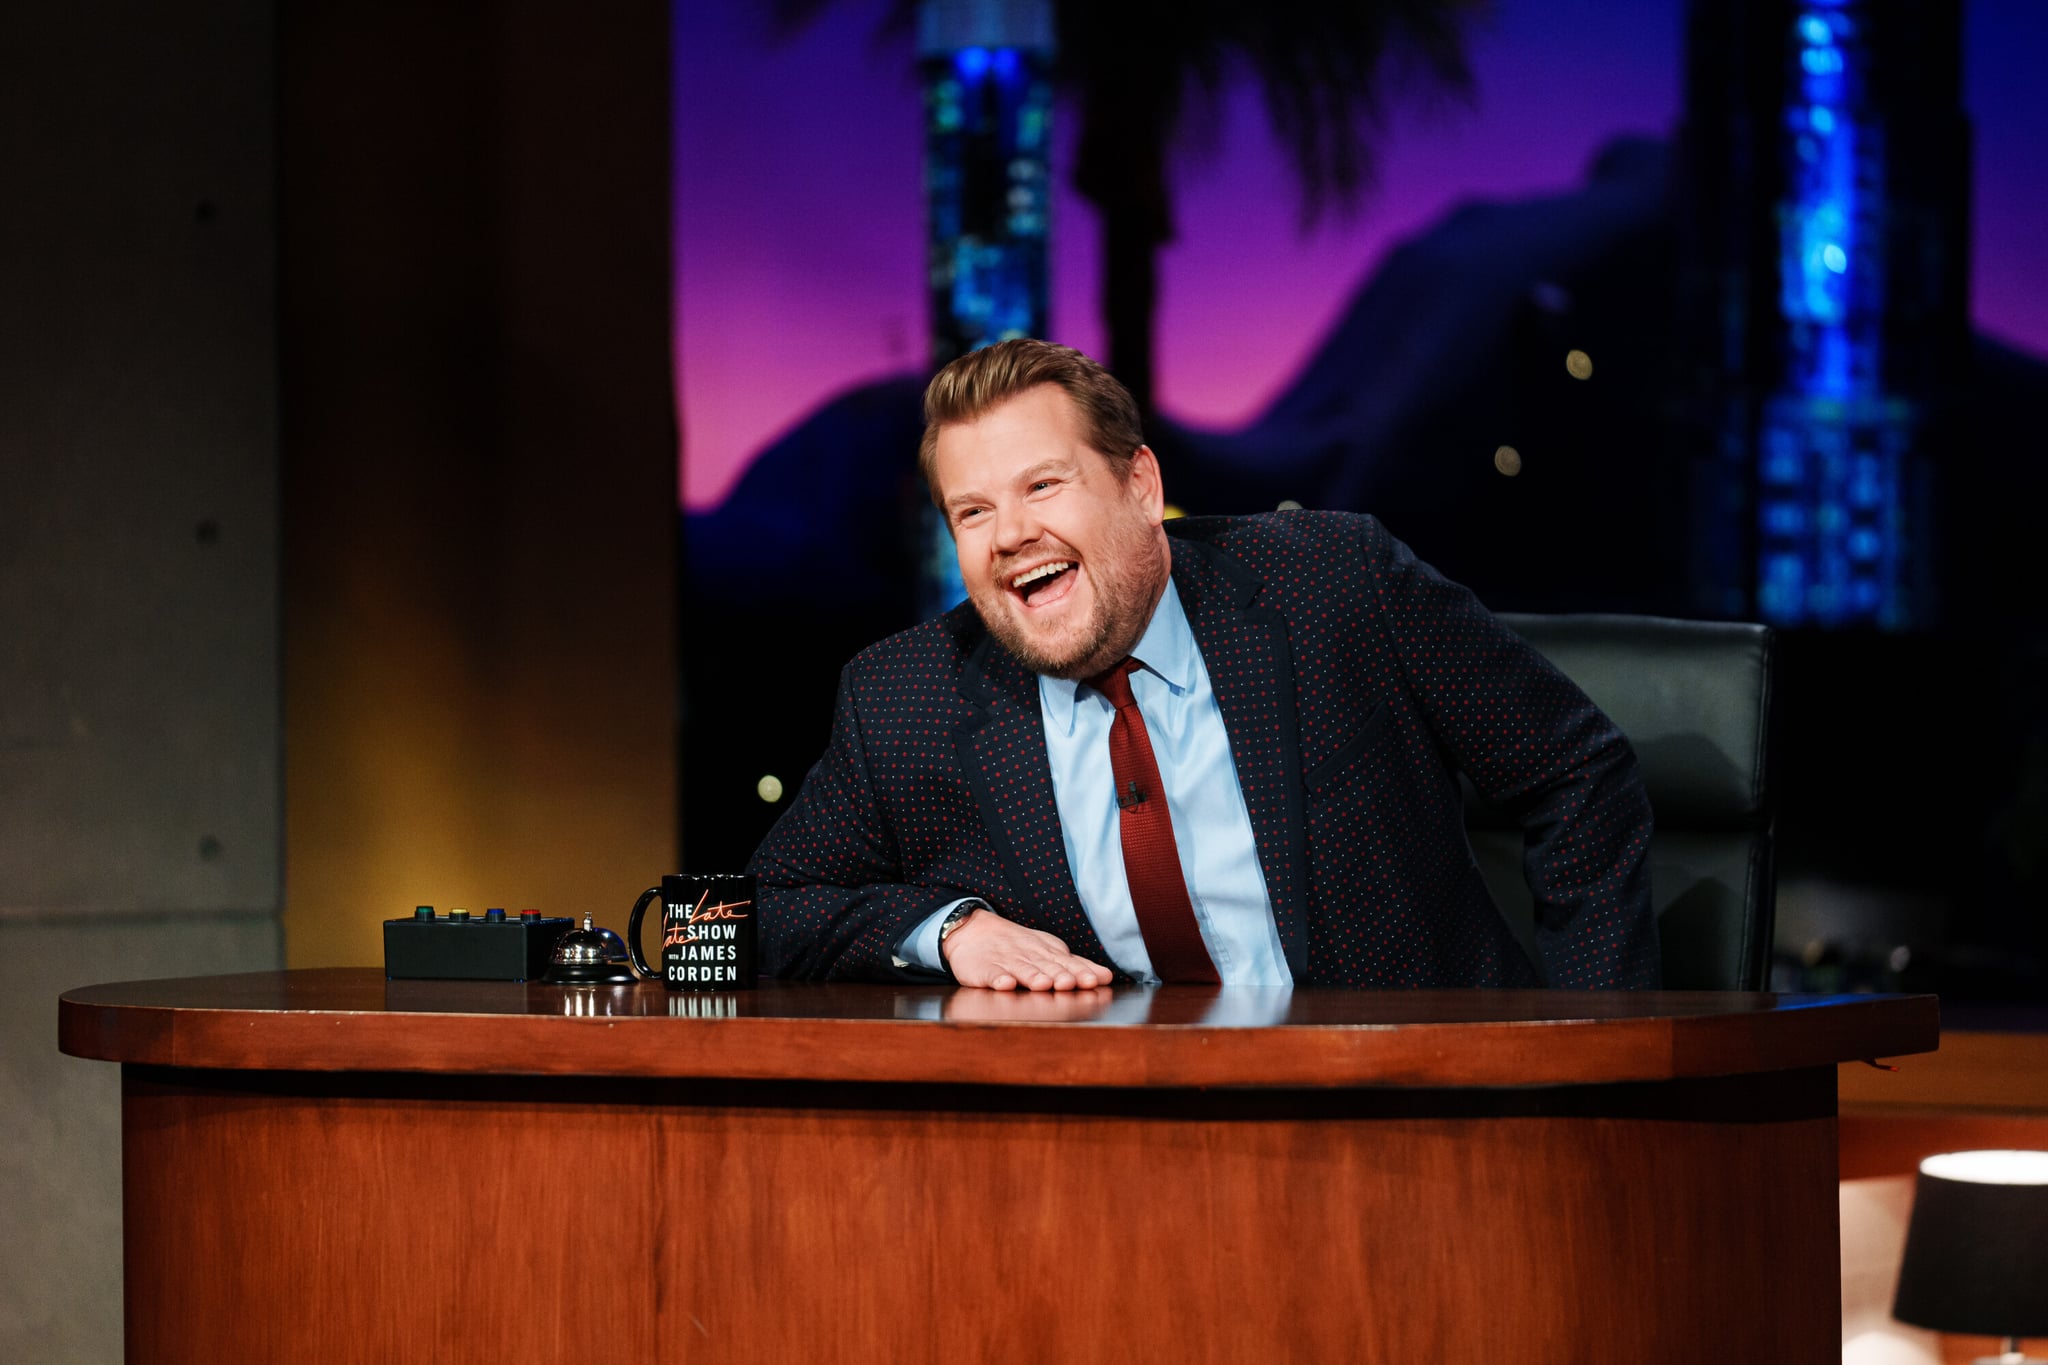 The Late Late Show with James Corden airing Wednesday, January 18, 2023, with guests Angela Bassett, Brian Tyree Henry, and Julia Wolf. Photo: Terence Patrick ©2023 CBS Broadcasting, Inc. All Rights Reserved